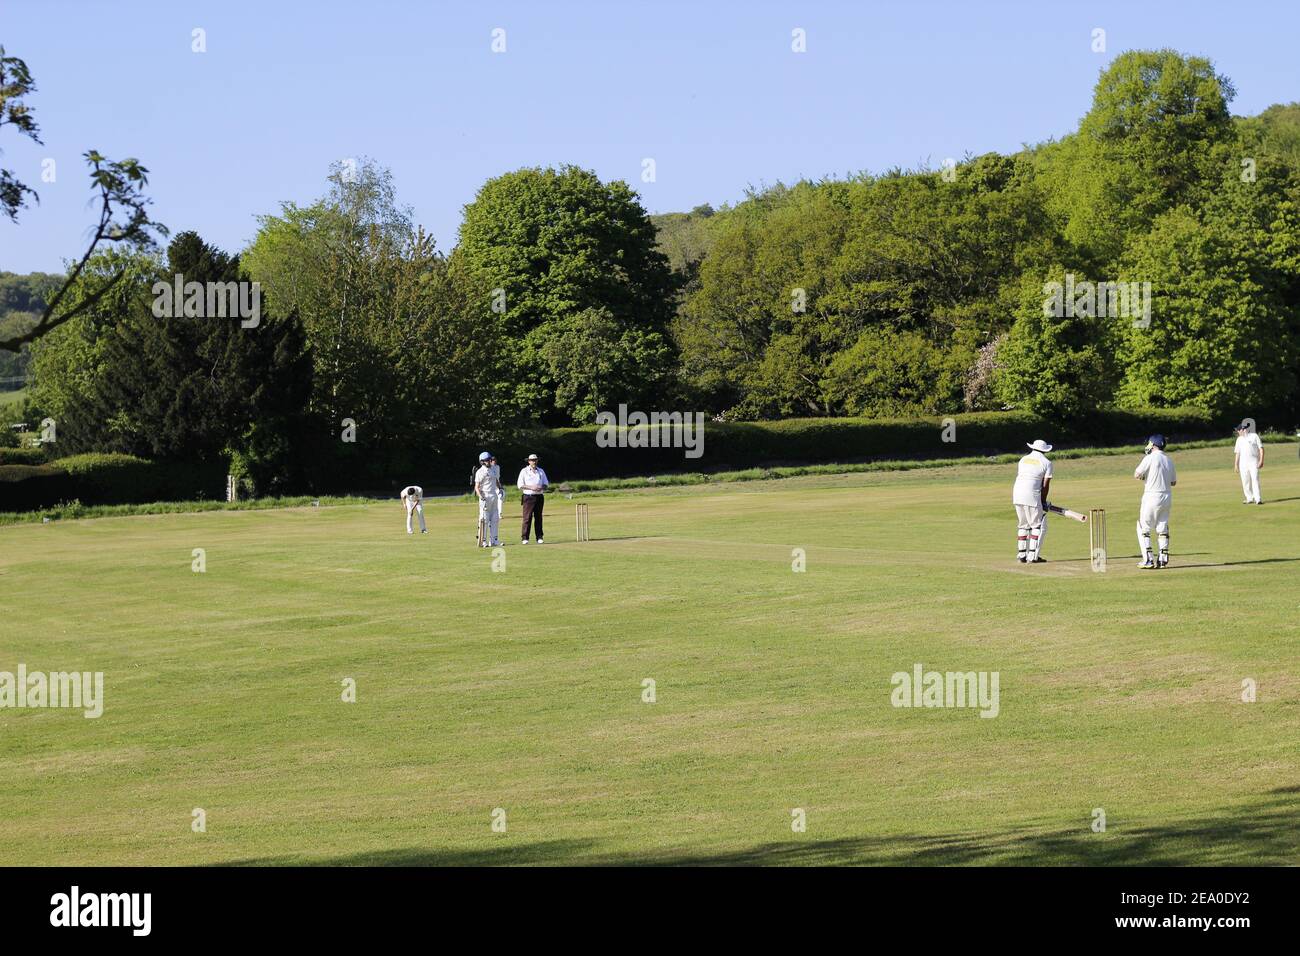 Cricket players in England Stock Photo